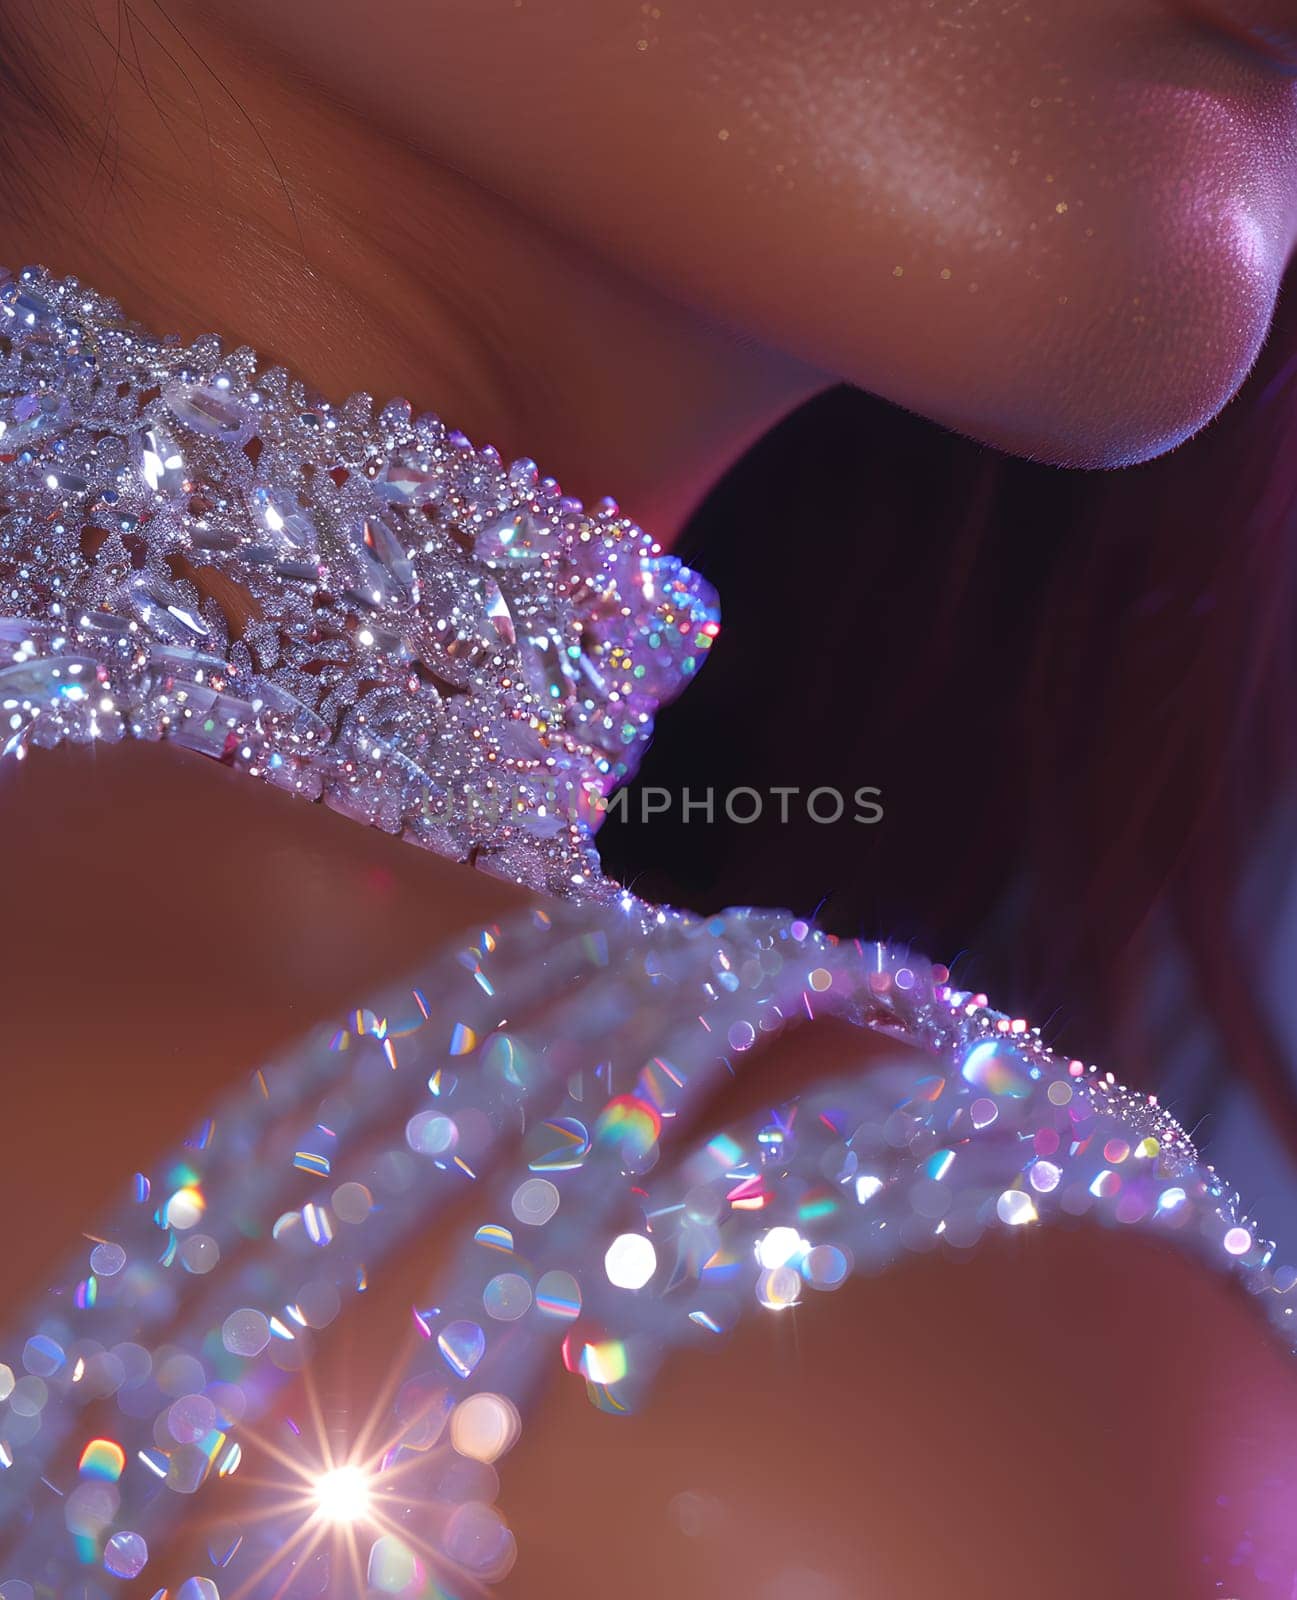 a close up of a woman wearing a necklace with rhinestones on it by Nadtochiy